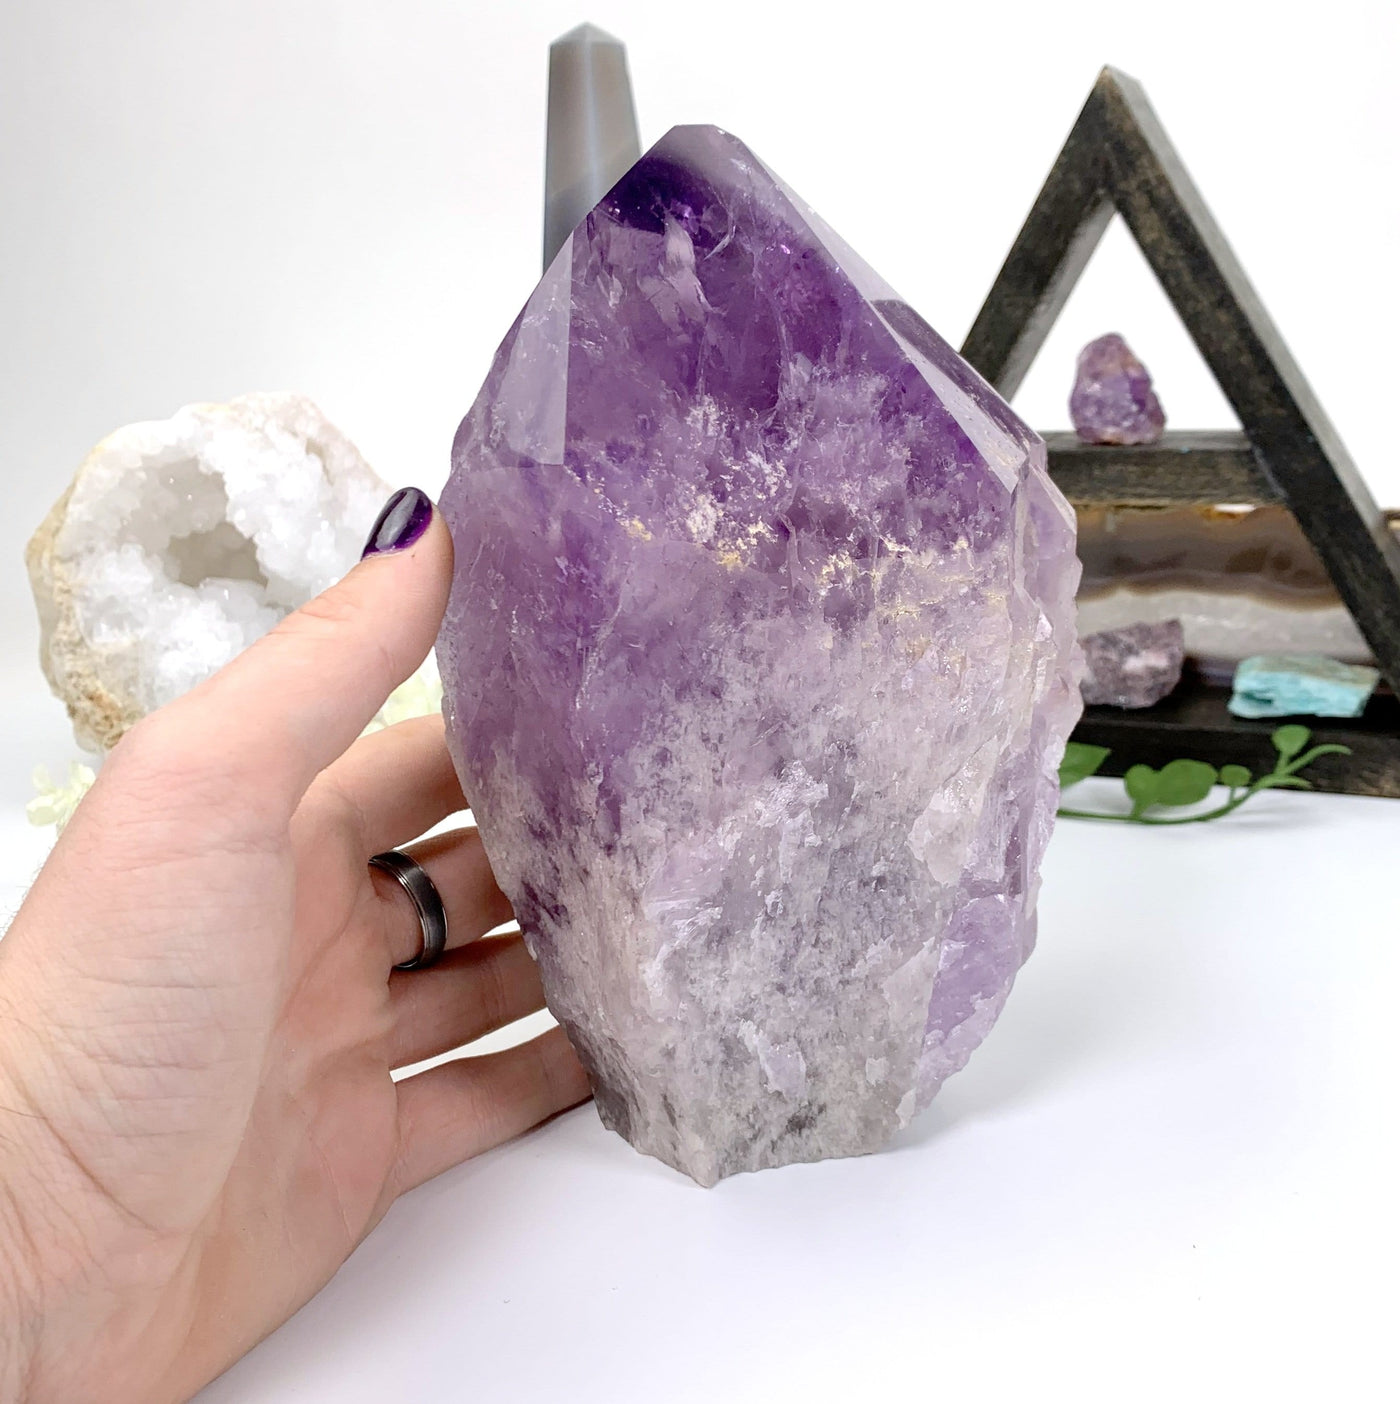 Back view of High Quality Amethyst Point, hand placed on the side of it for size reference.